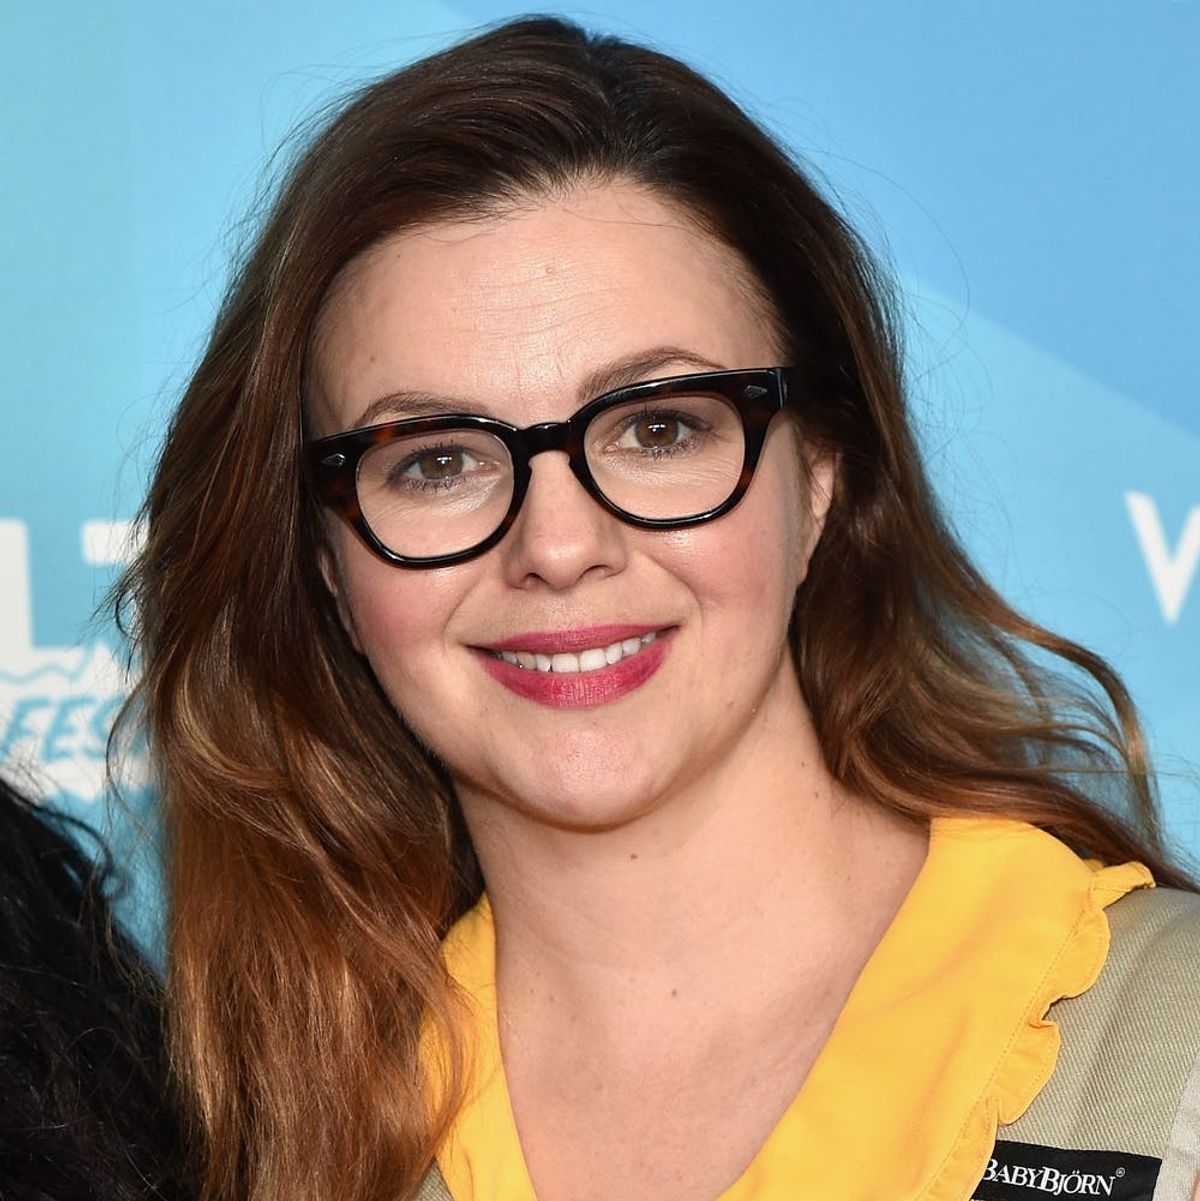 Amber Tamblyn on Accusations of Racism Against Her Husband: “I Believe” Charlyne Yi